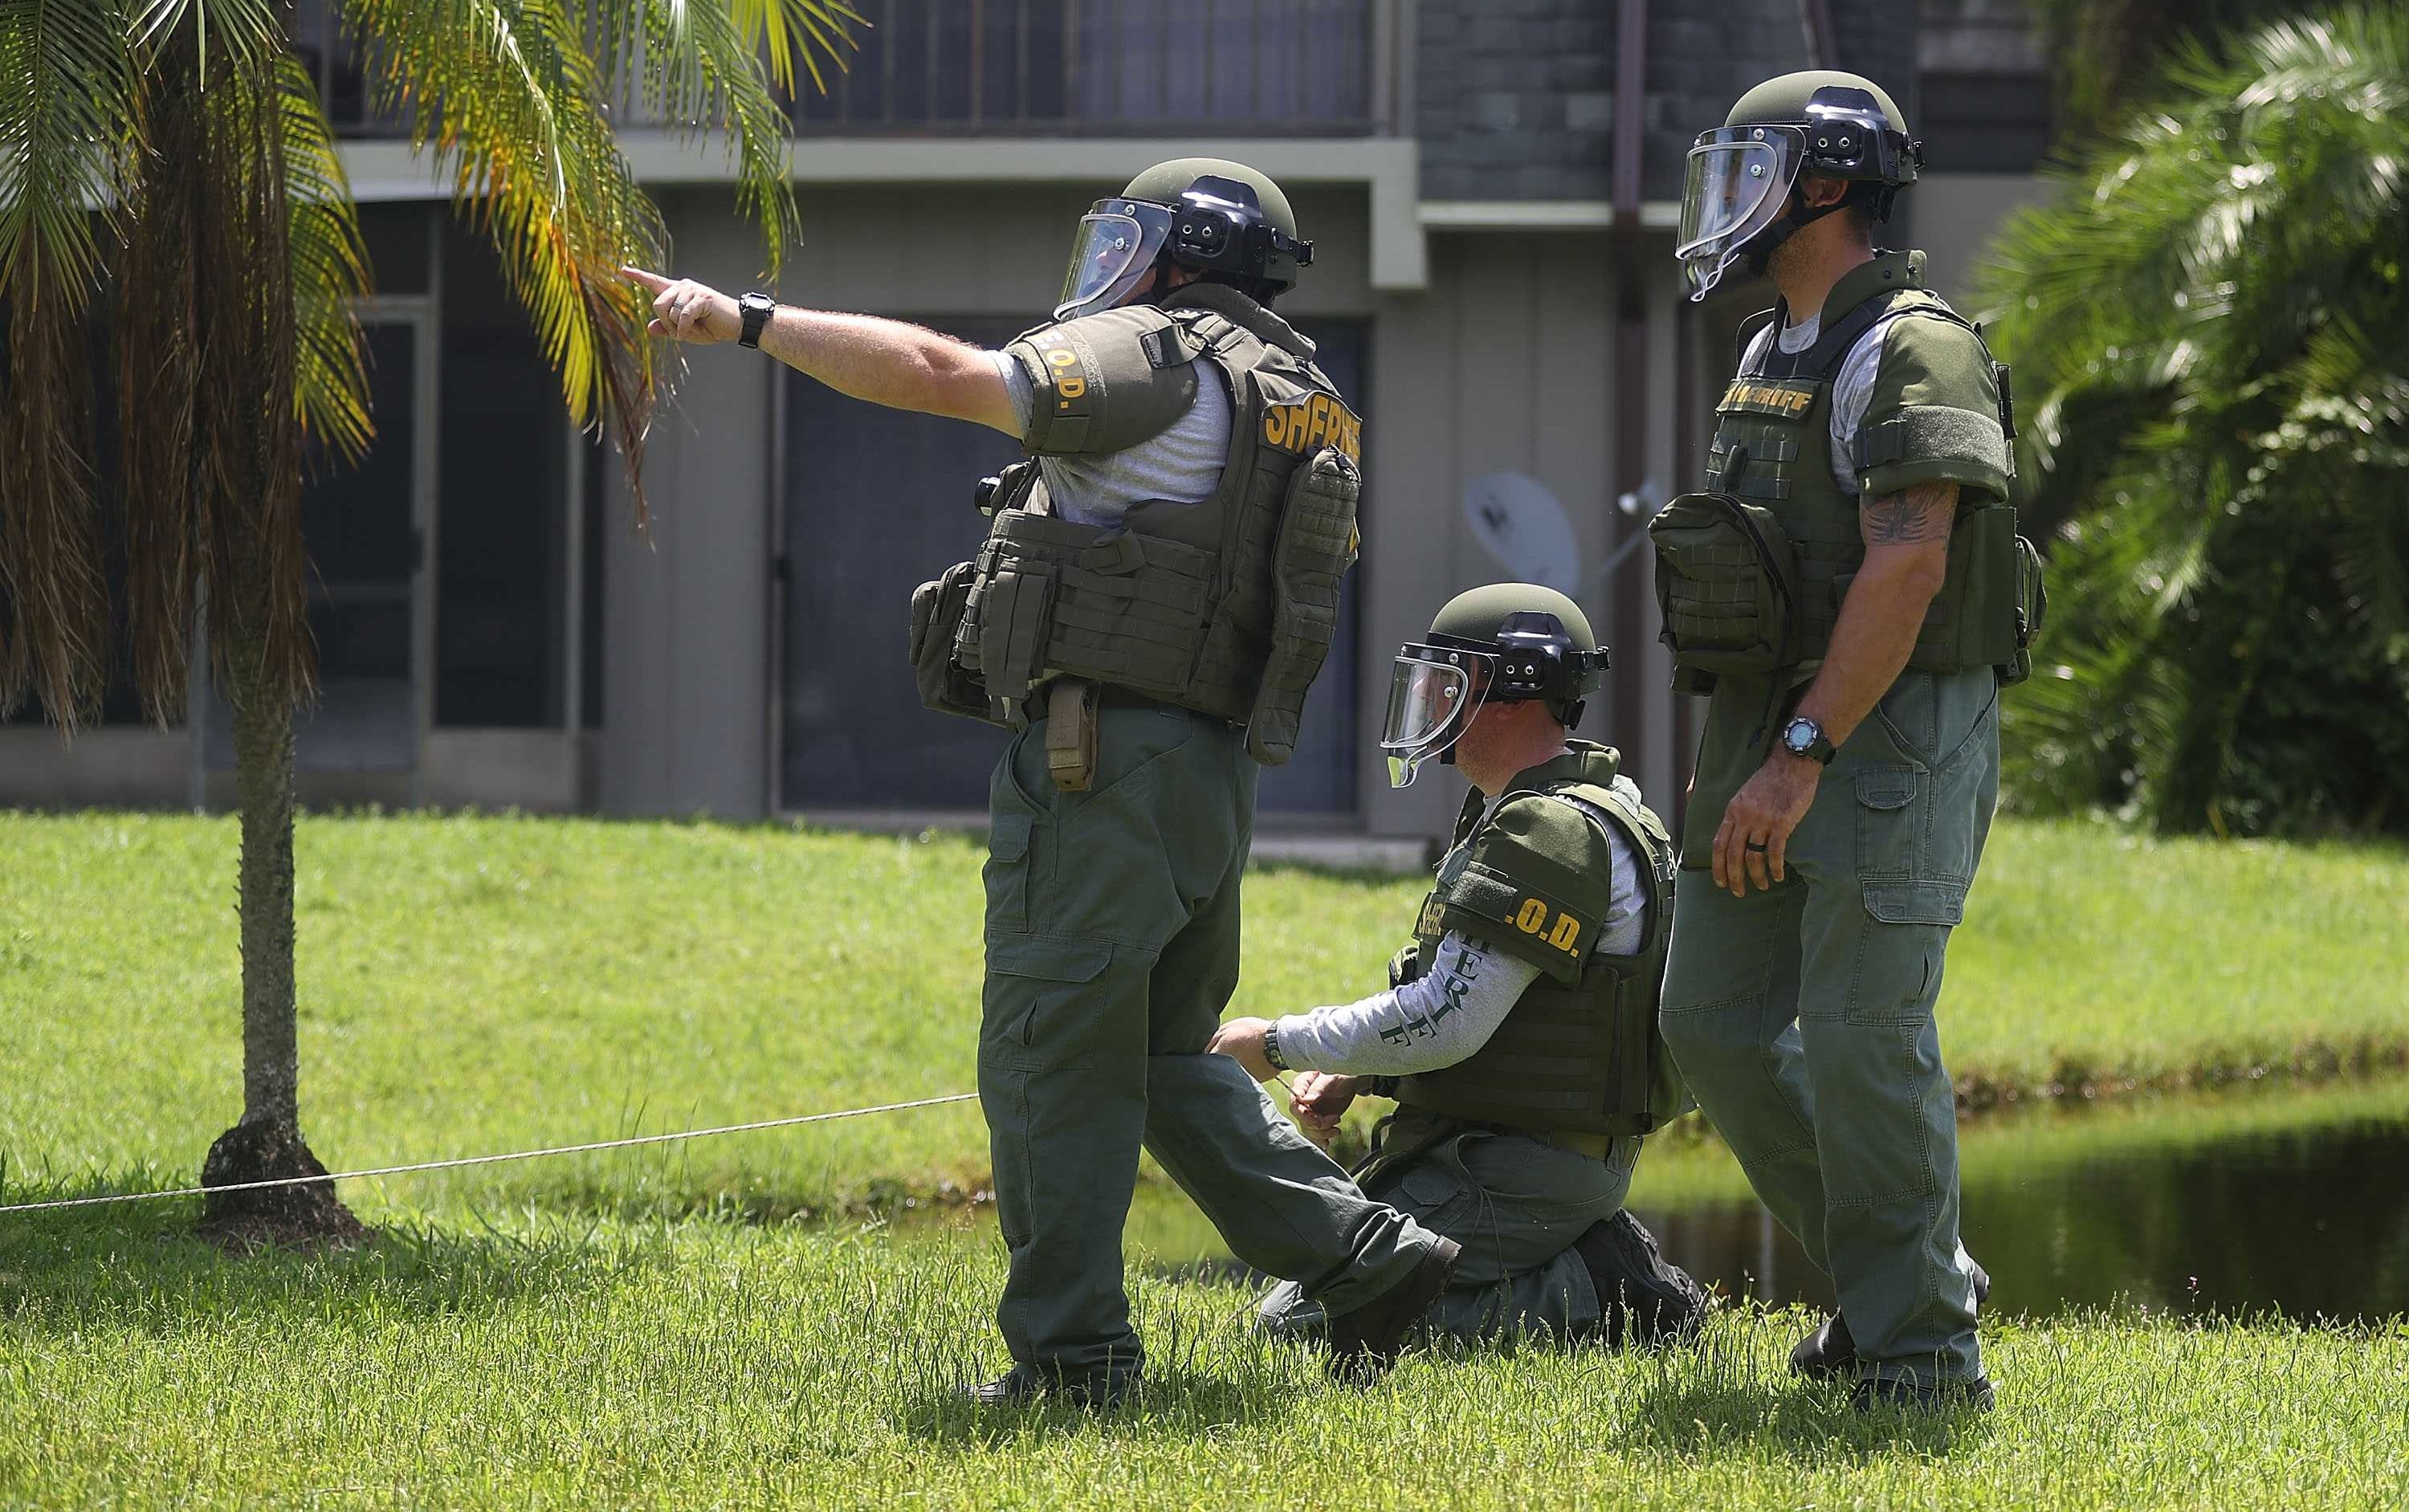 A Bomb Disposal Unit checks for explosives around the apartment building where shooting suspect Omar Mateen is believed to have lived on June 12, 2016 in Fort Pierce, Florida.